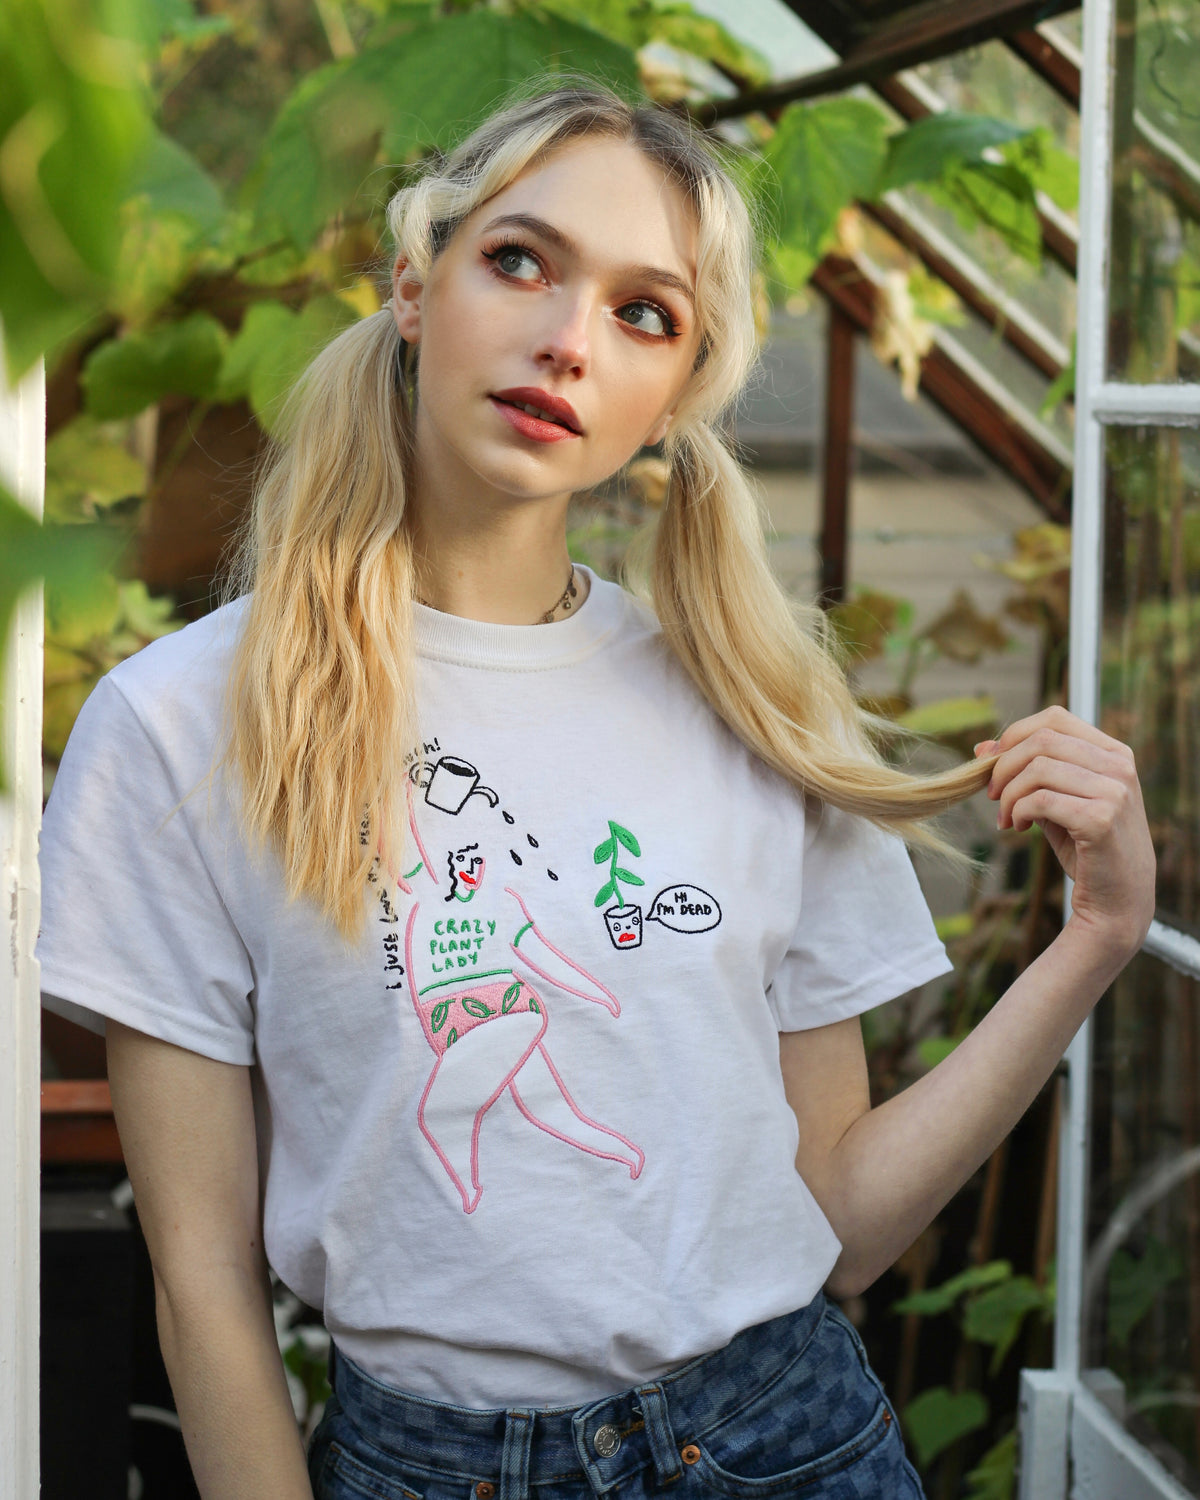 Crazy Plant Lady Embroidered T-Shirt